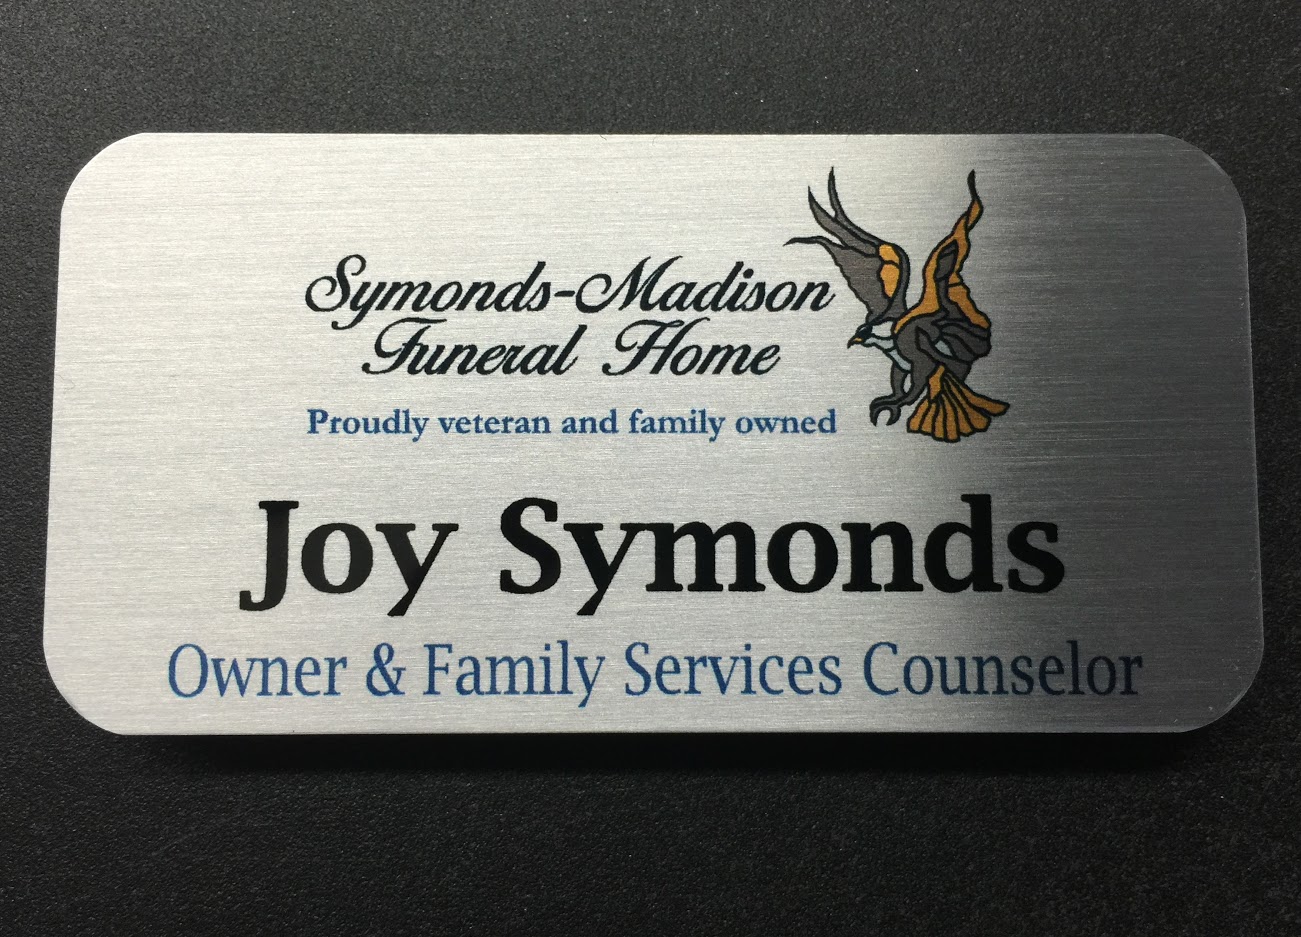 Brushed silver metal nametag. Design for Symonds-Madison Funeral Home.